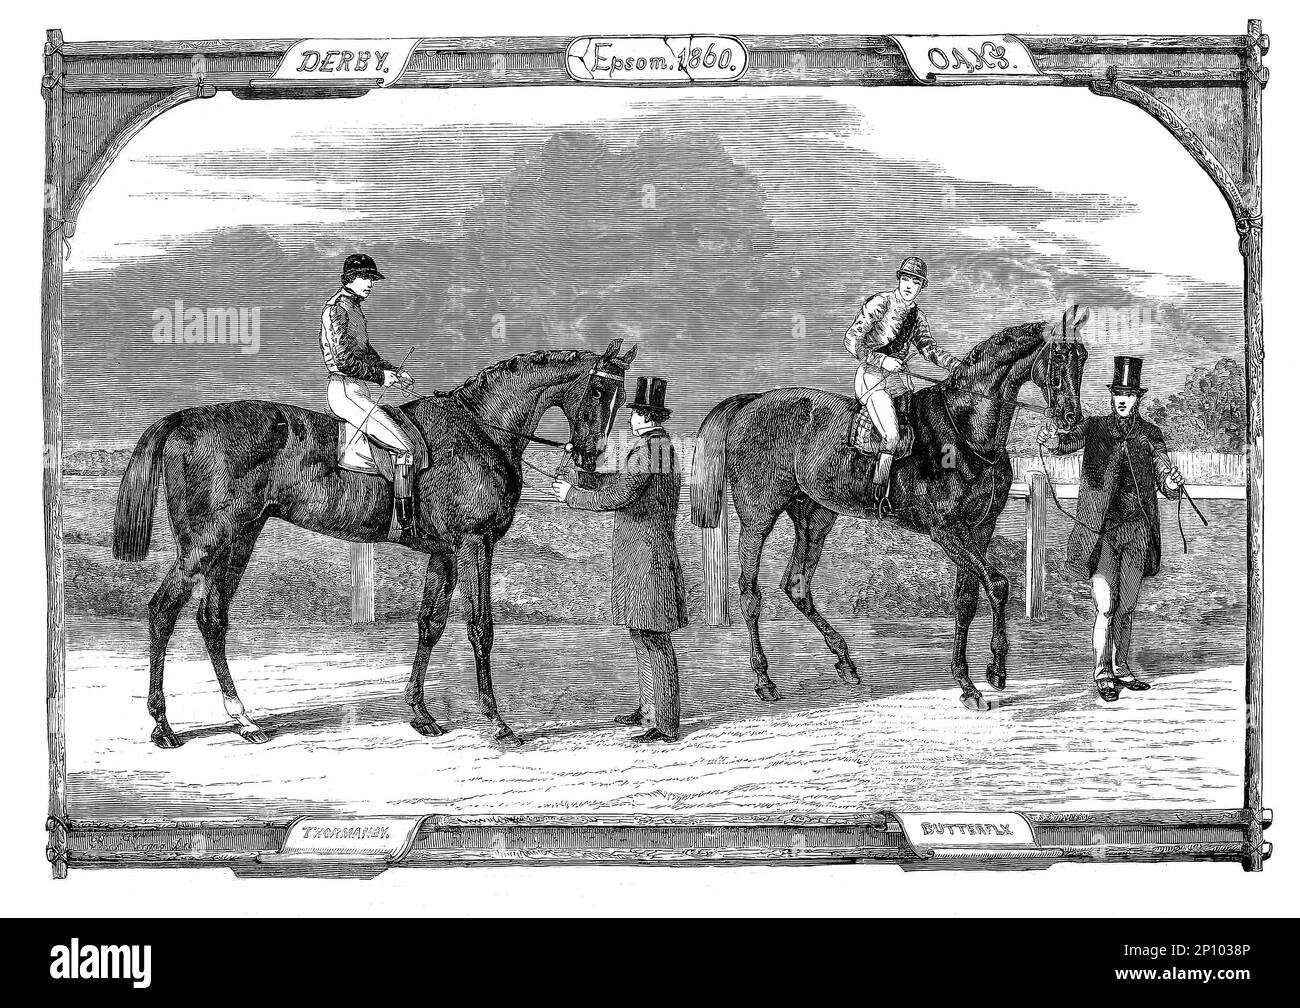 The winners of the 1860 Epsom Derby and Oaks flat horse race  at Epsom Downs Racecourse in Surrey, England drawn by Benjamin Herring (1830-1871) Stock Photo